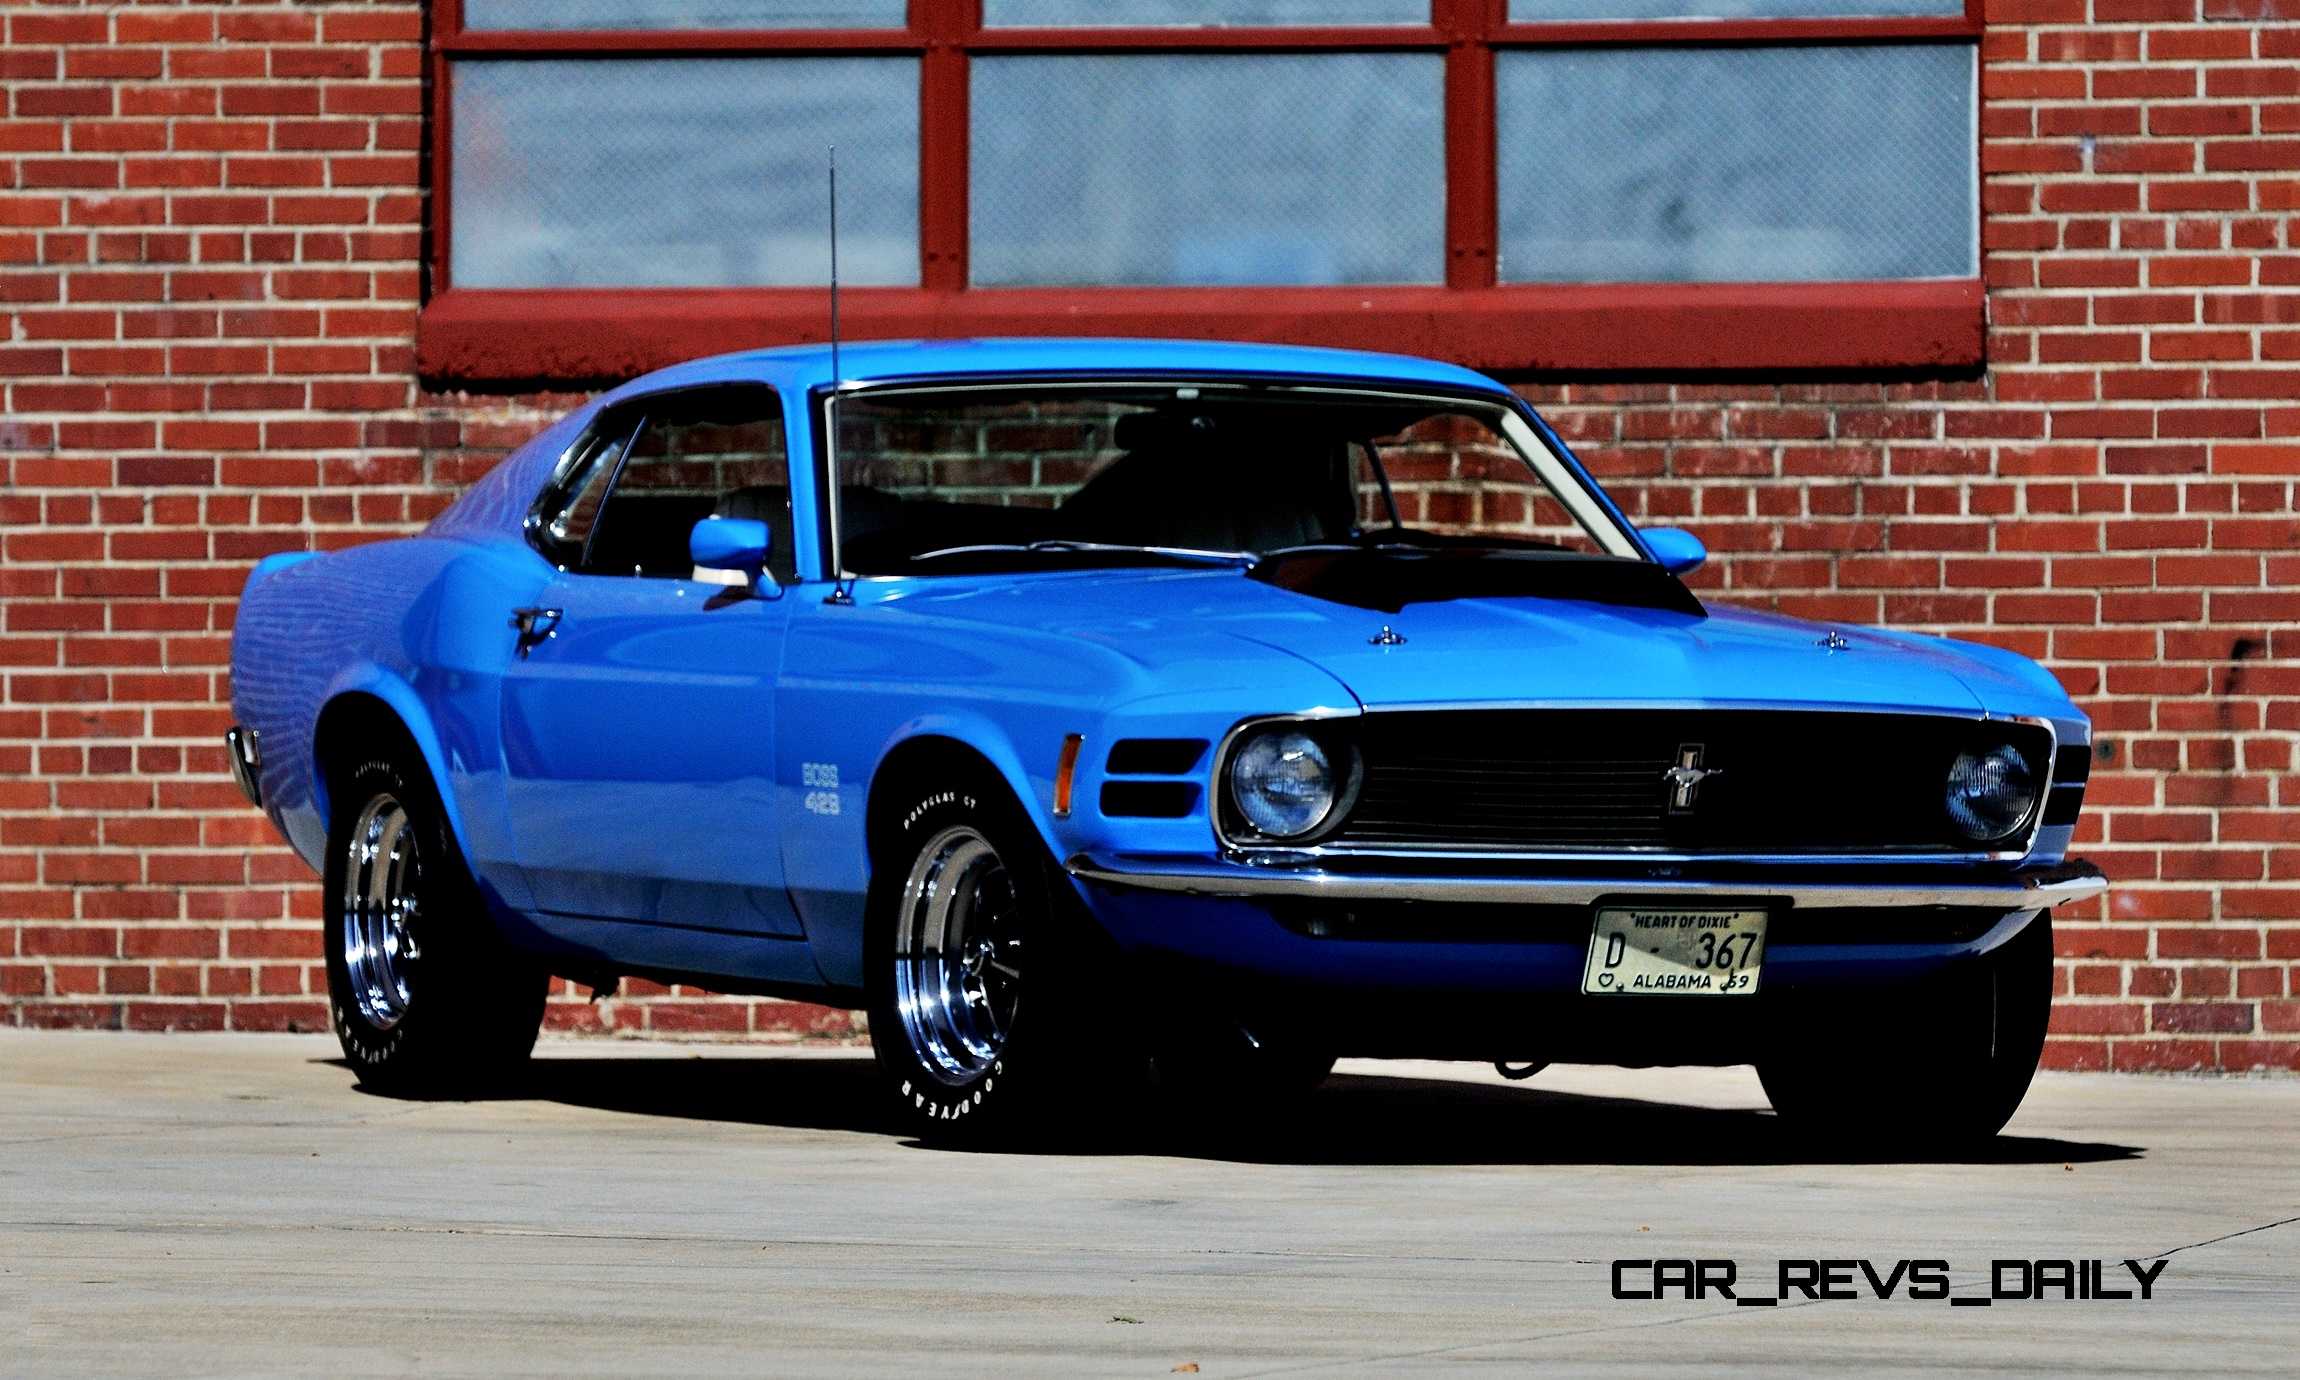 1970 Ford Mustang Boss 429